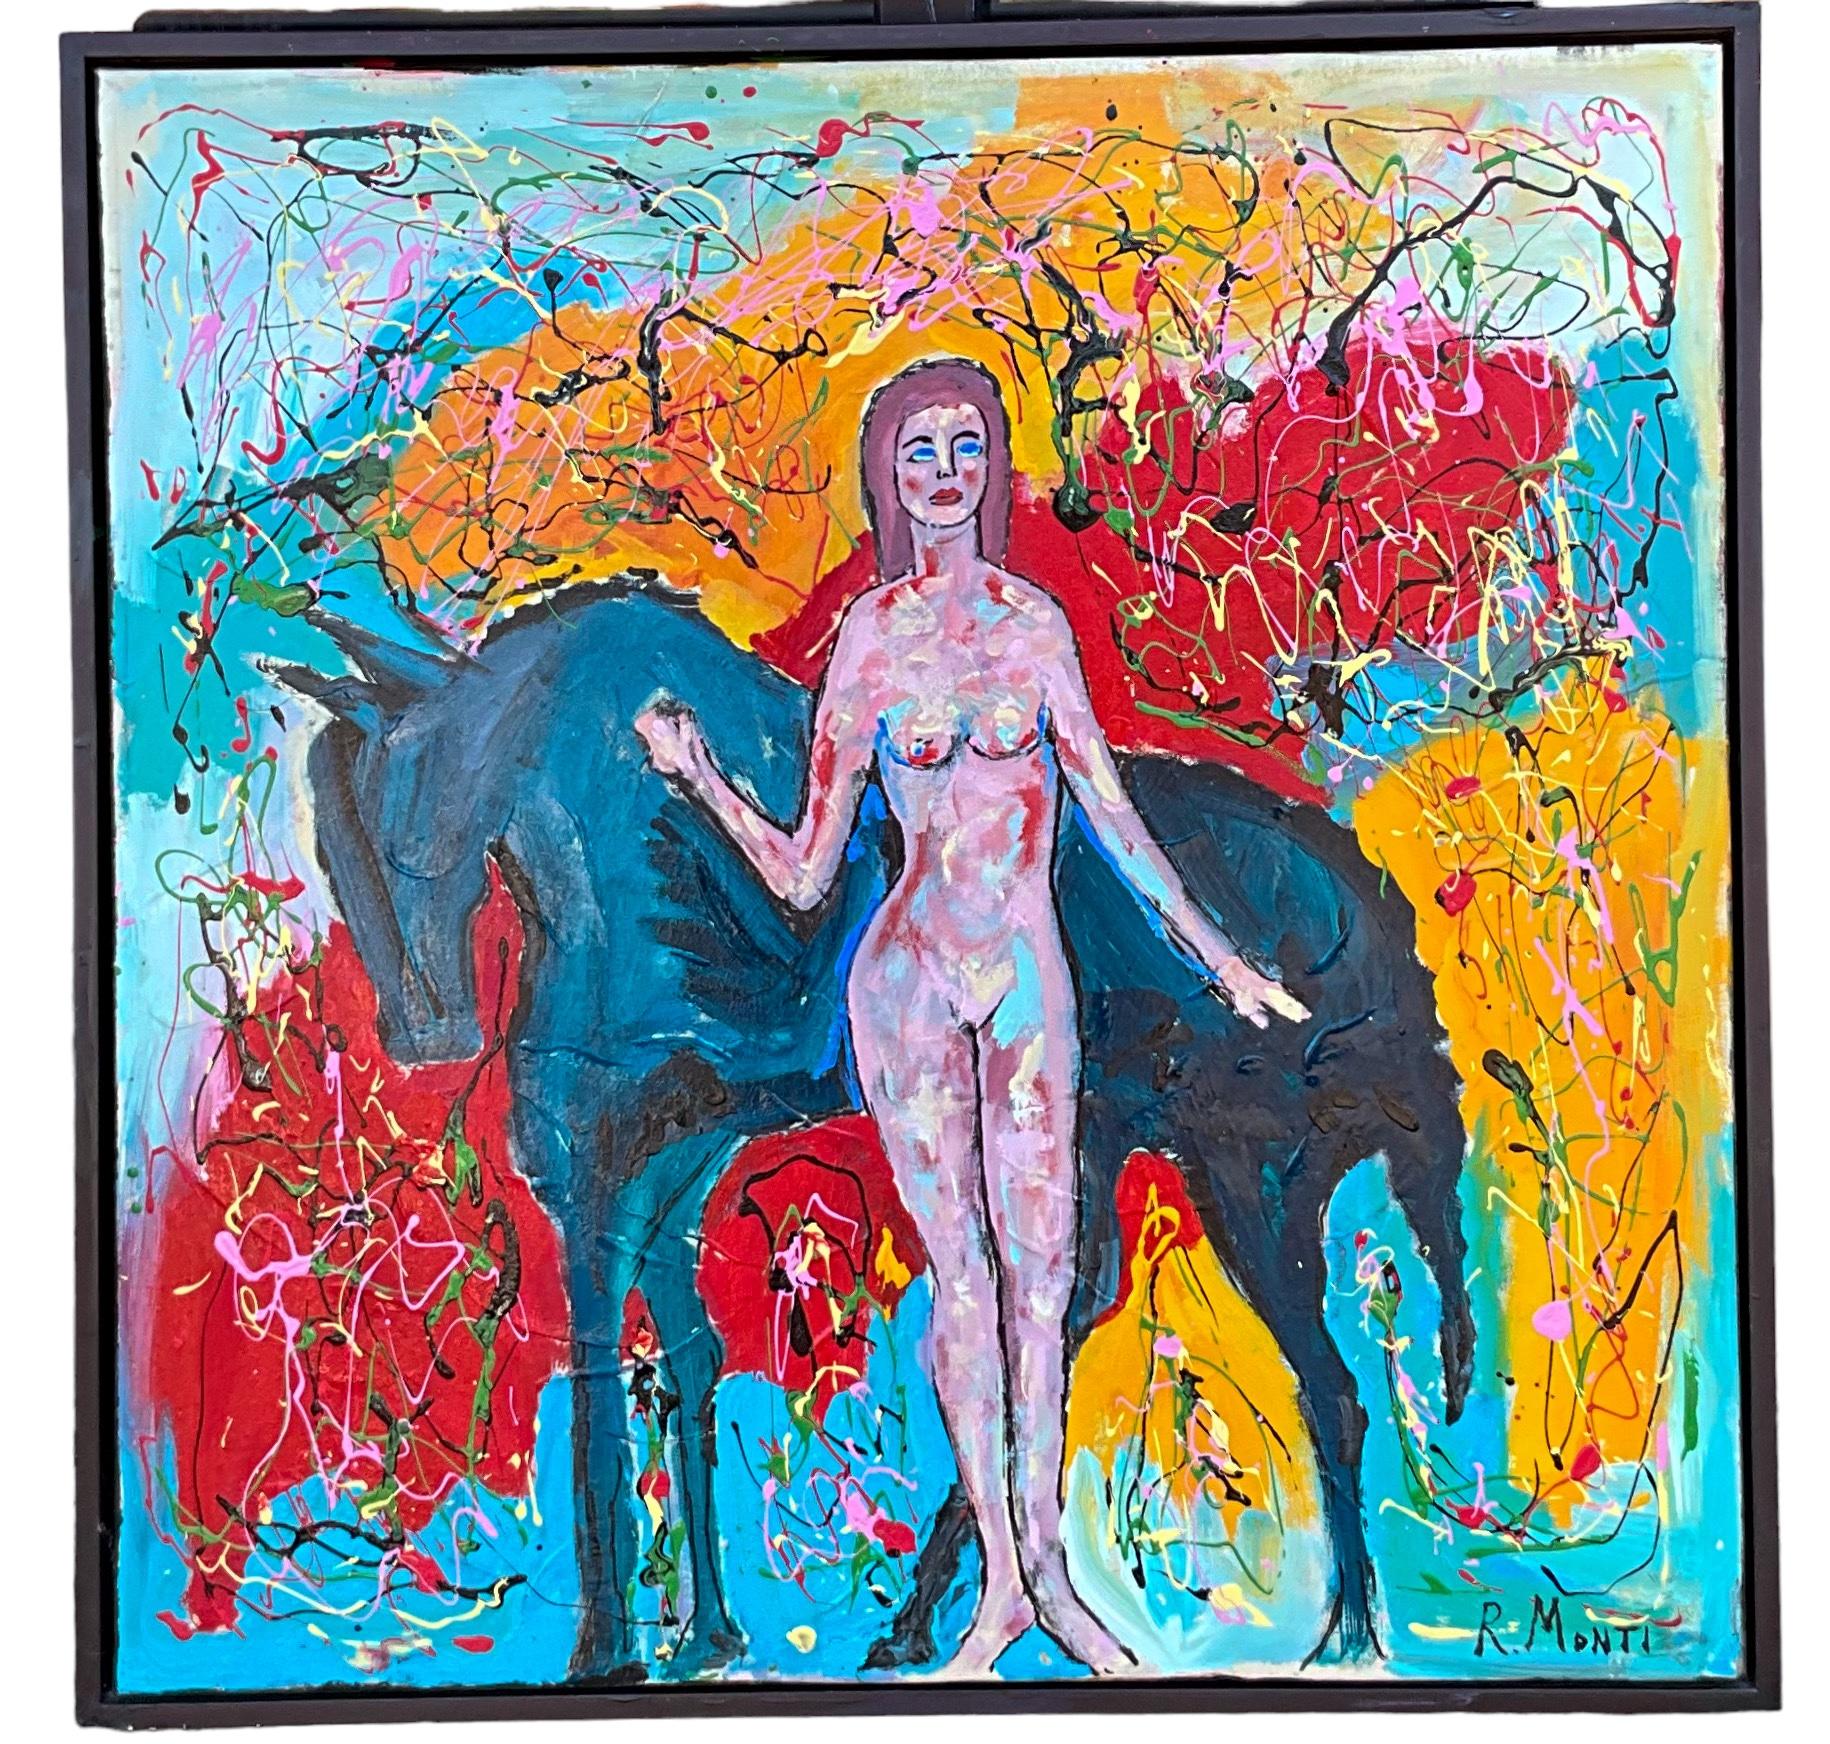 This is a large scale modern abstract oil painting of a female nude with a horse and colorful background. It is signed R. Monti. It is framed in a simple brown frame.